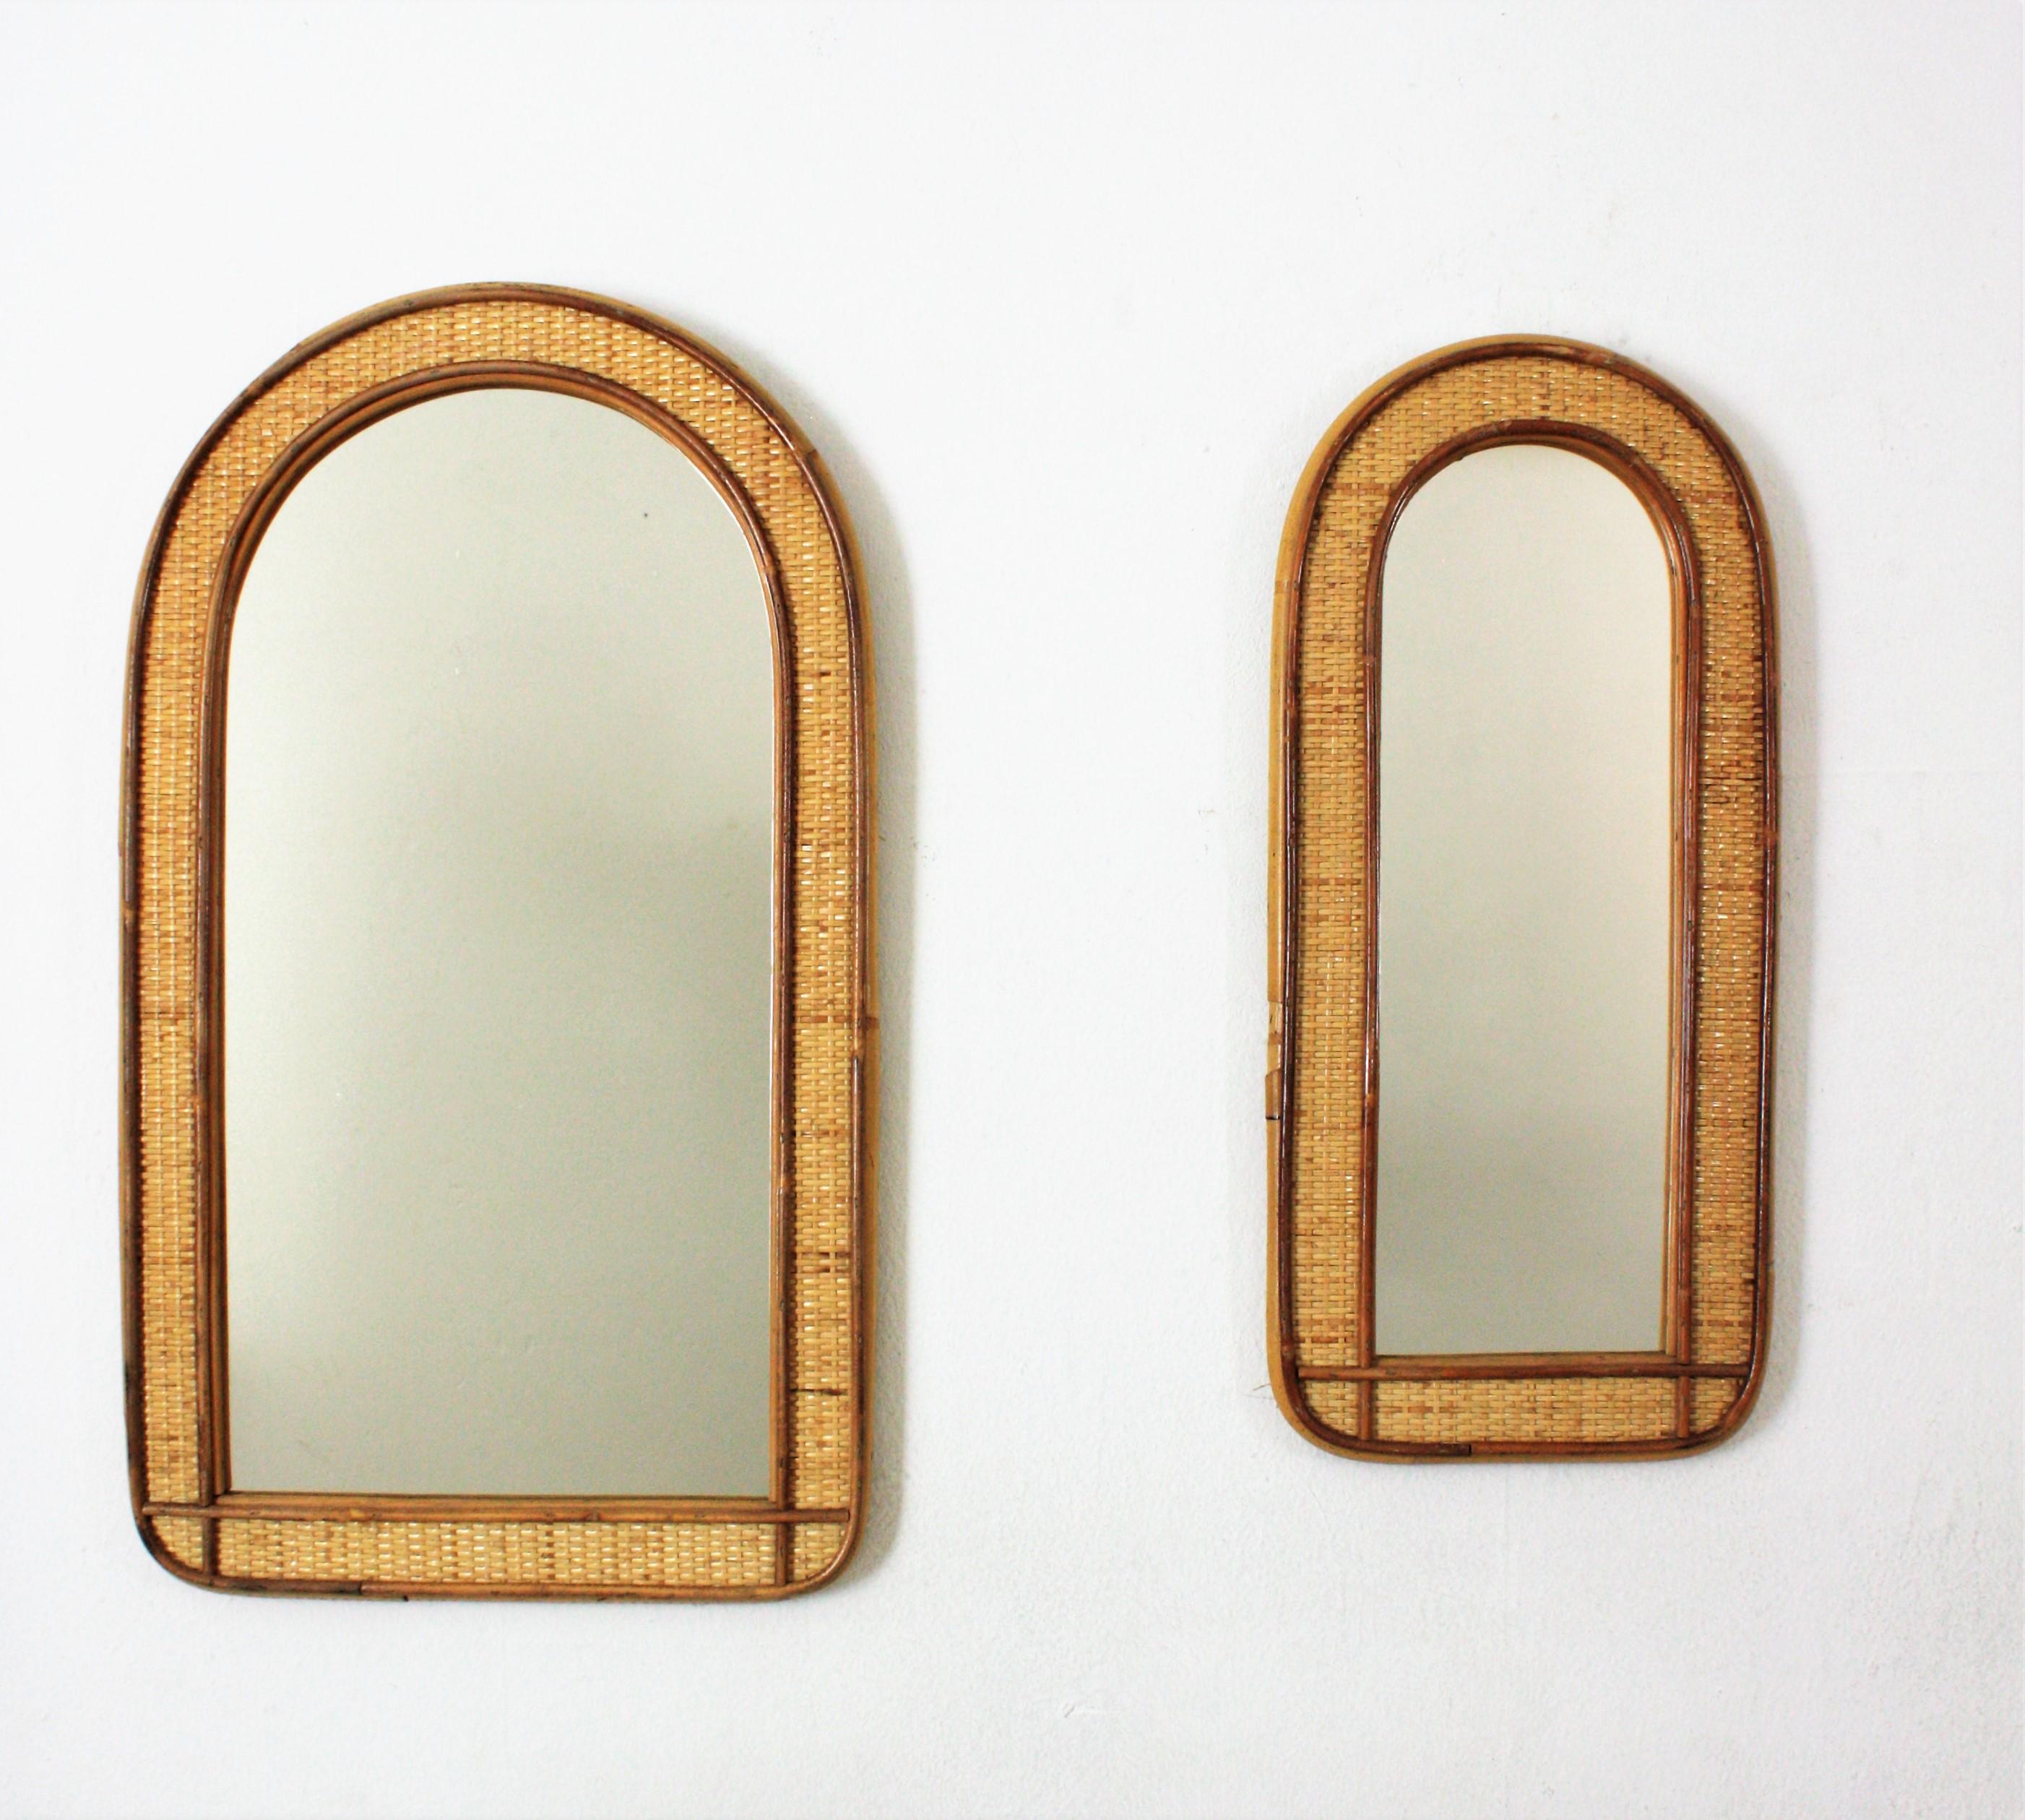 20th Century Rattan Woven Wicker Wall Mirror with Arched Top For Sale